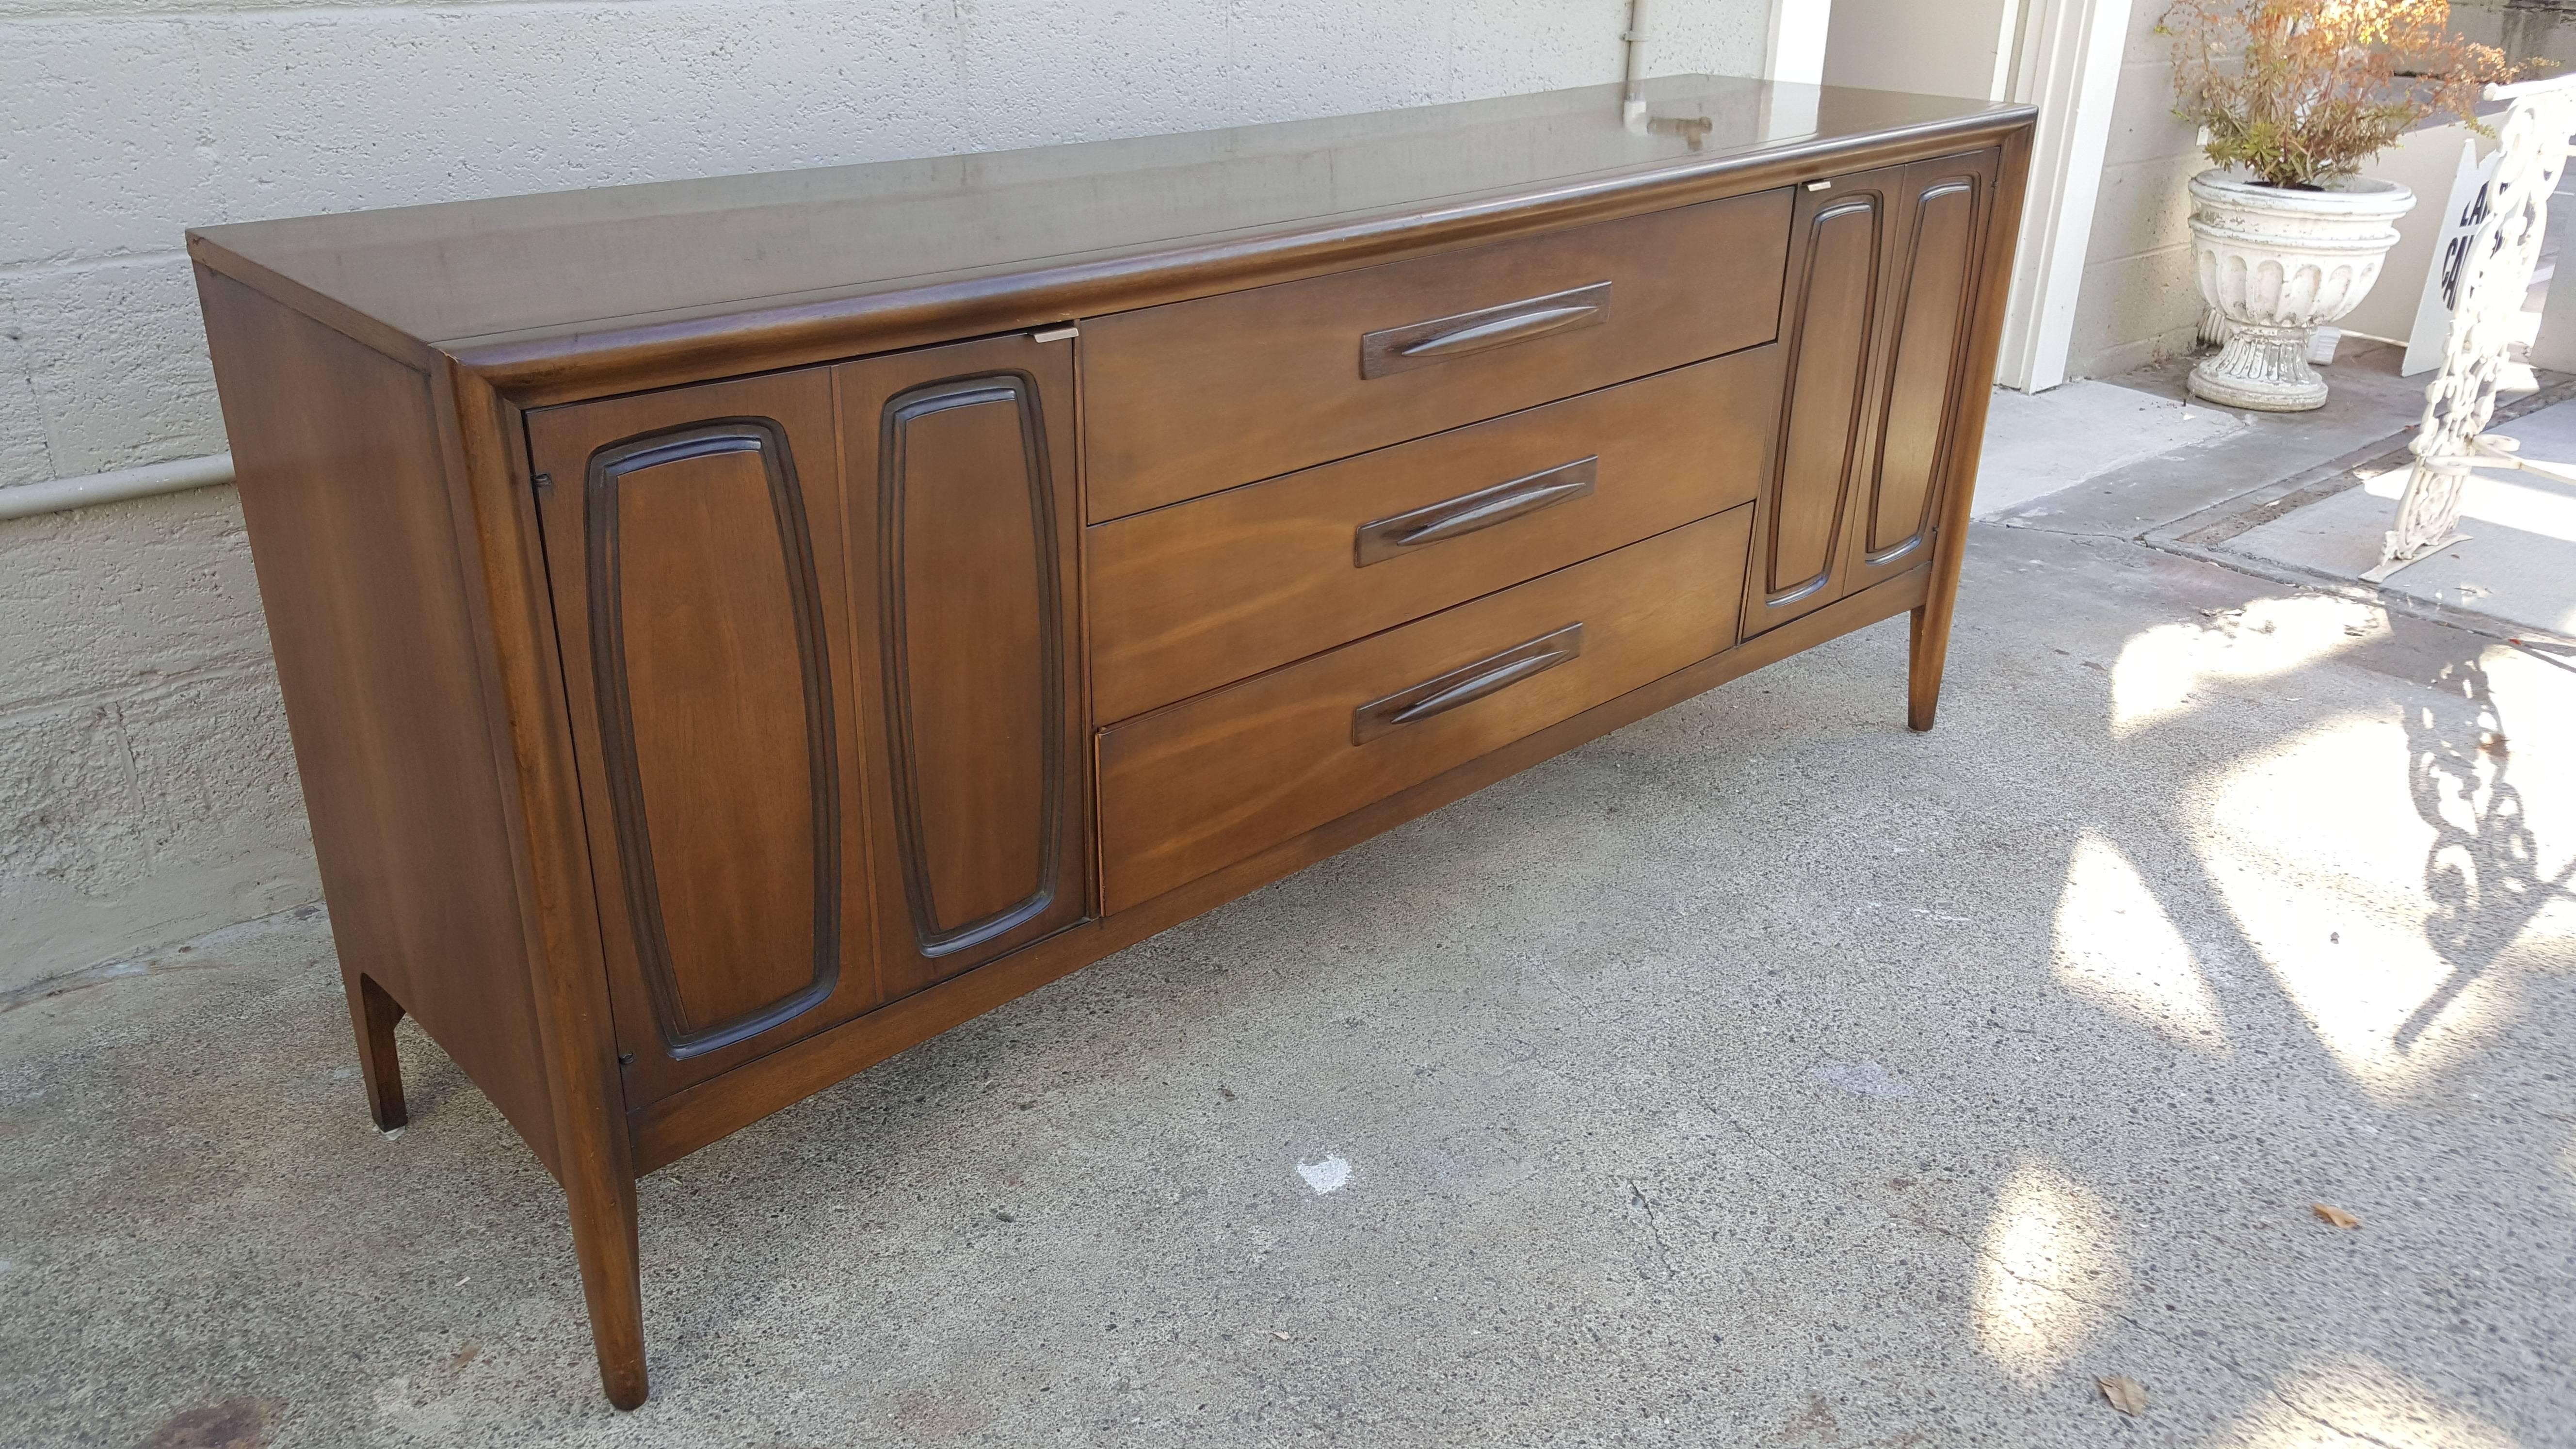 A mid-20th century modern walnut credenza manufactured by Broyhill Furniture, circa 1960. Long and sleek measuring 6 feet wide. Ample storage with nine drawers and six behind cabinet doors. Solid oak secondary woods and steel drawer glides. Broyhill